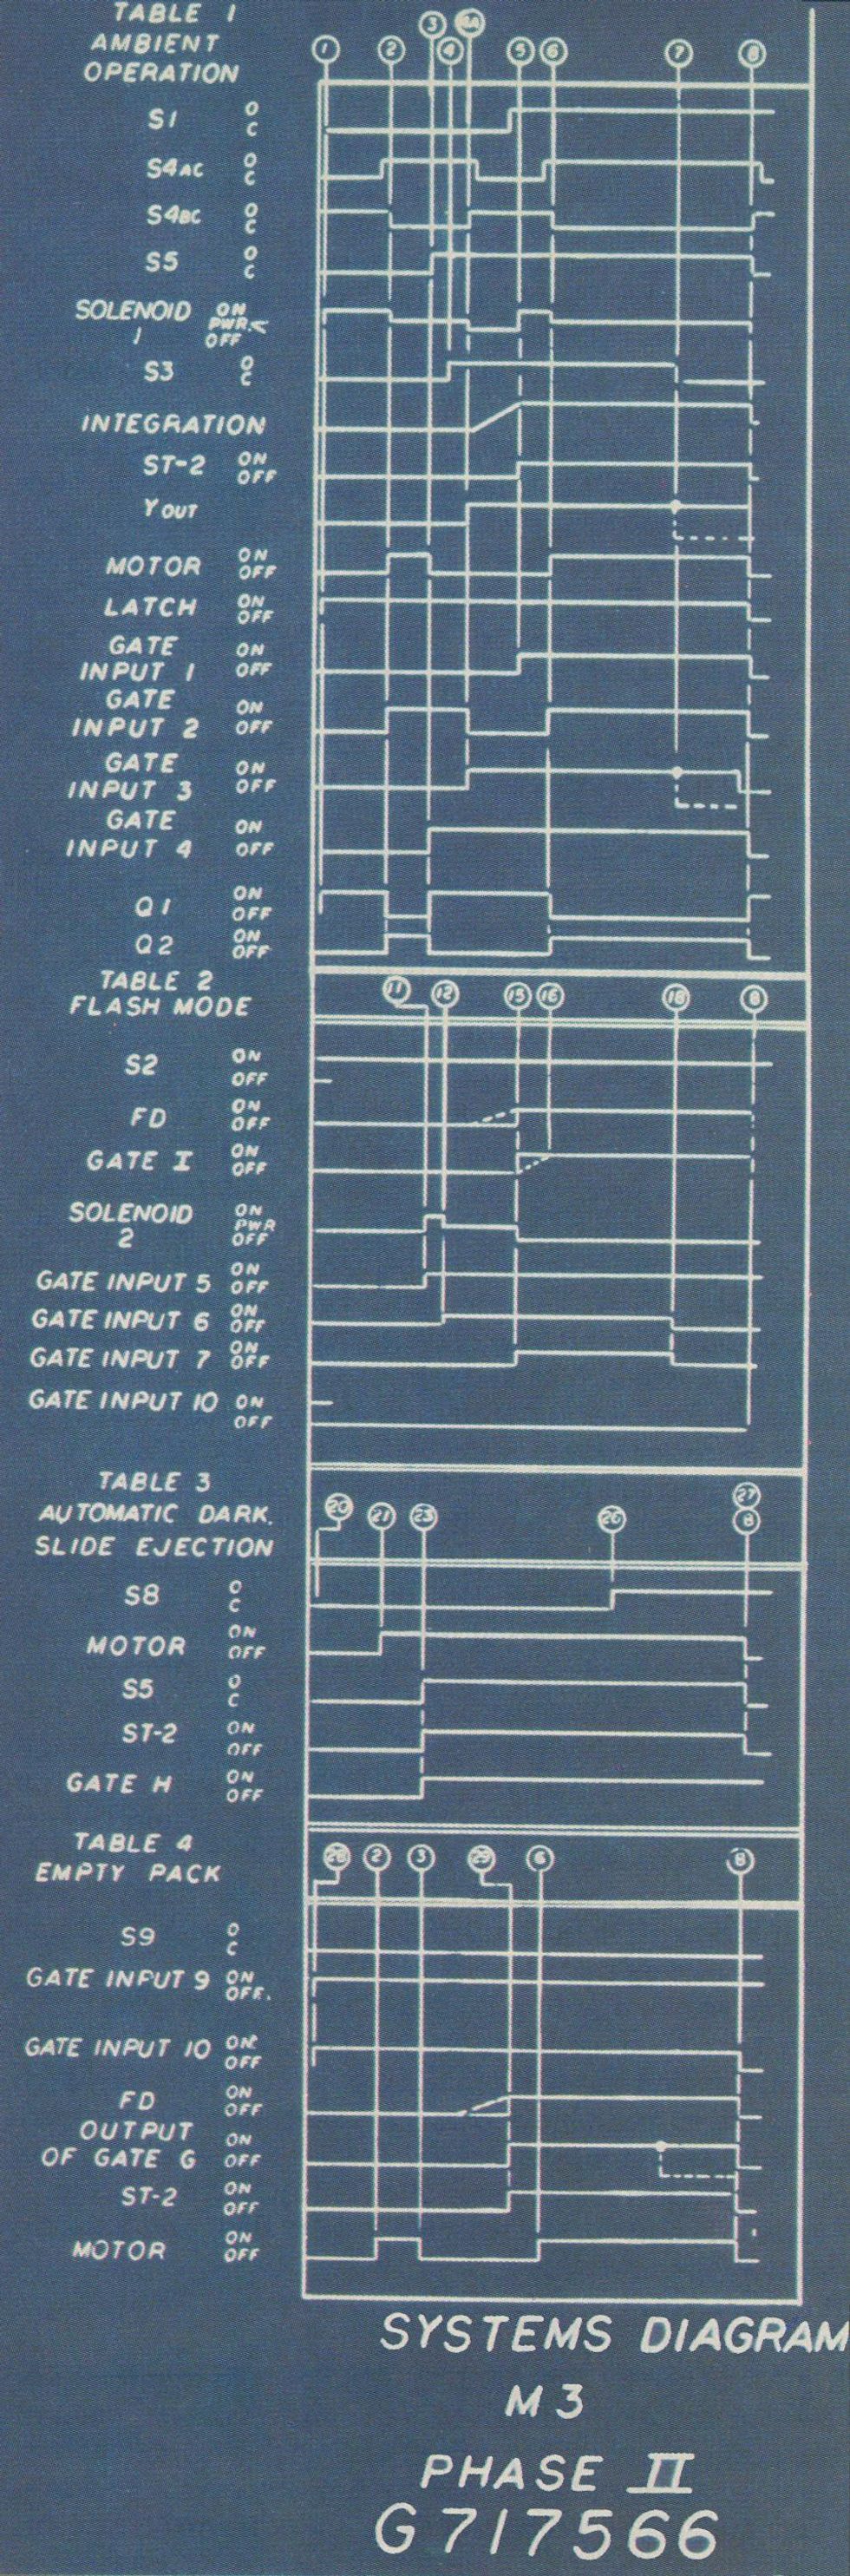 white wiring diagram on blue-grey background with gates, outputs, and other features indicated, plus words "systems diagram M3 phase II G717566